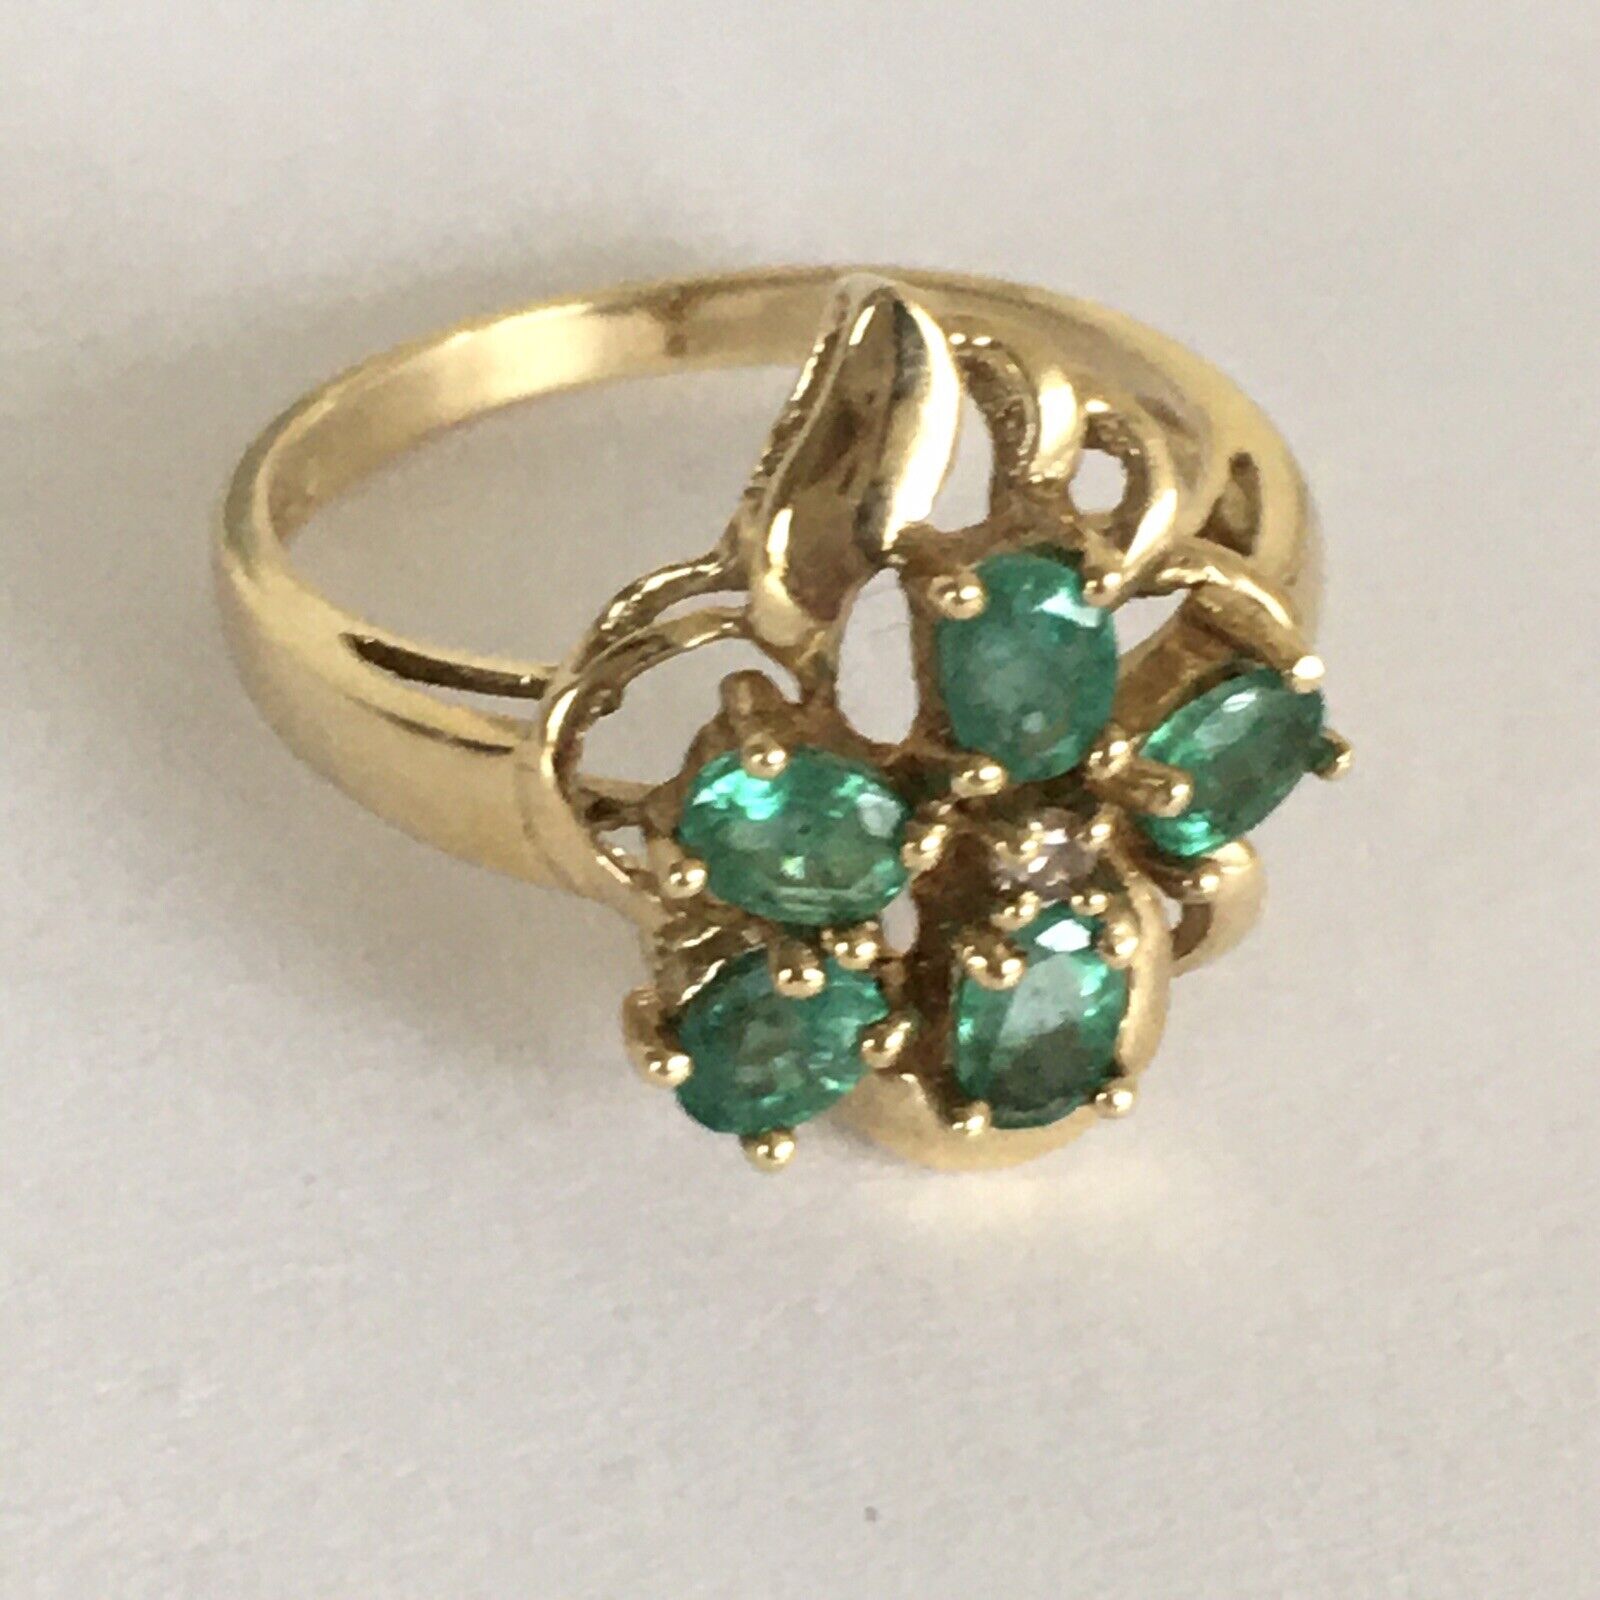 14k Solid Yellow Gold Genuine Emerald Diamond Ring Jewelry Gift On